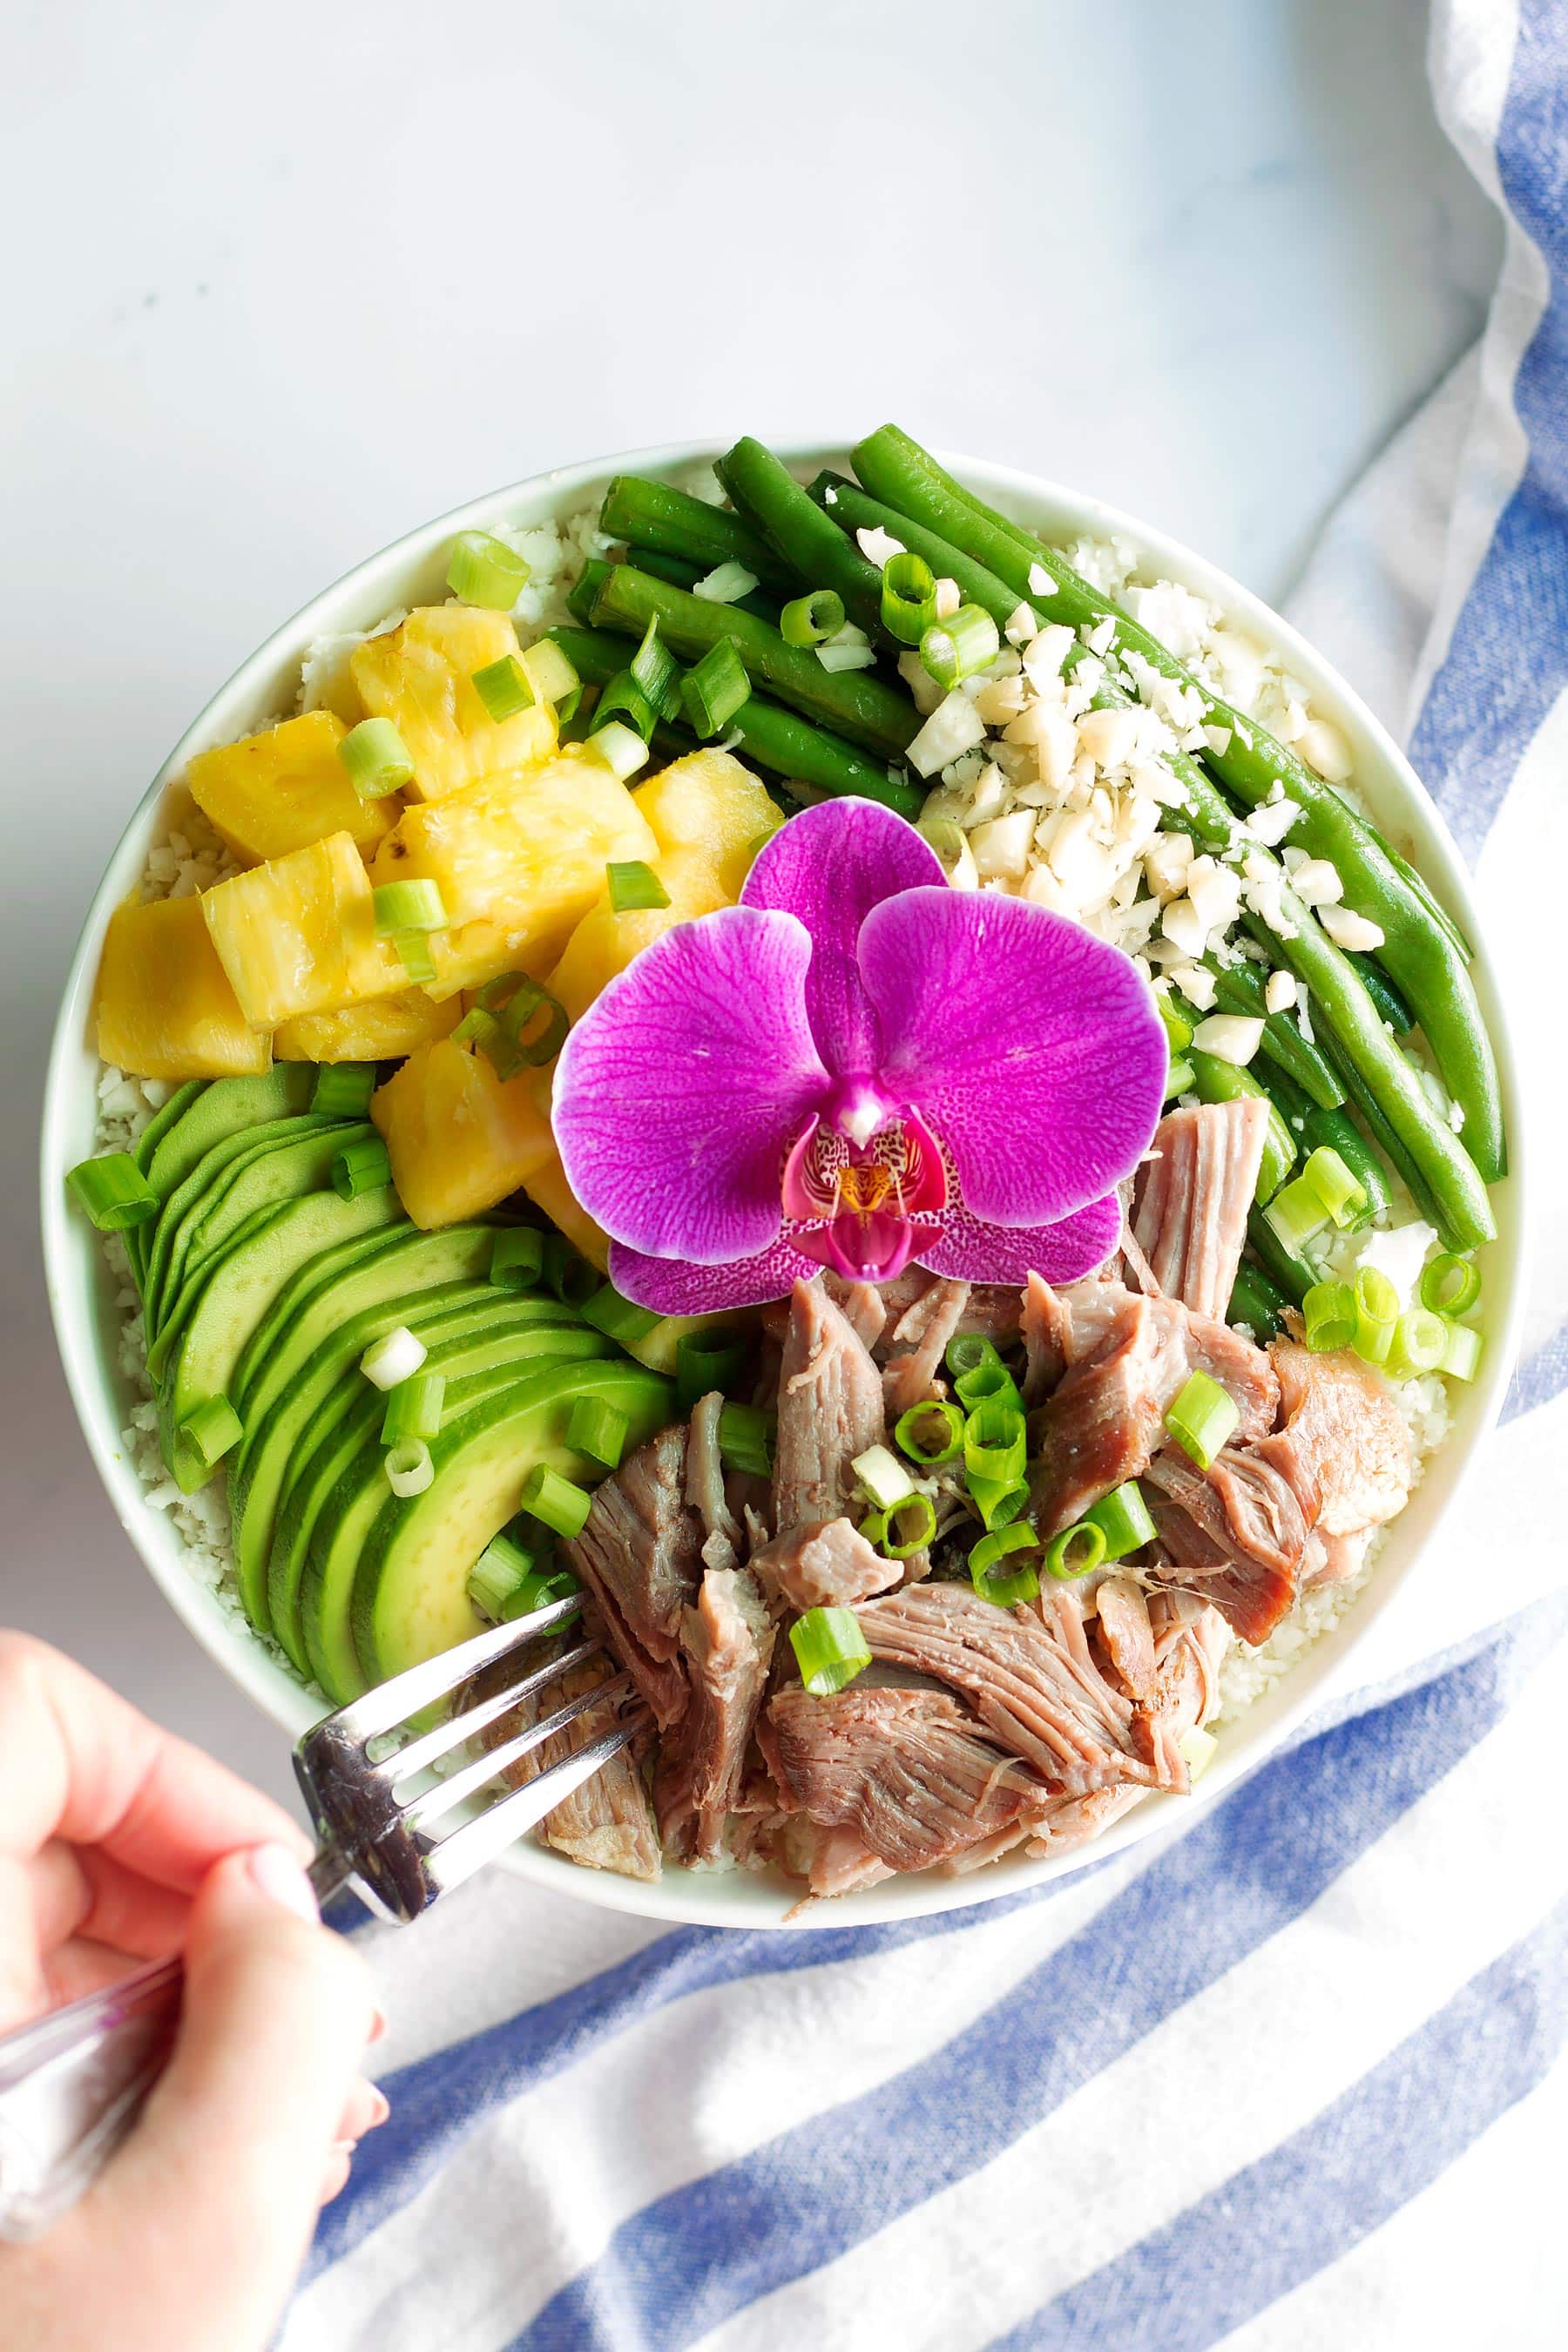 Tender, succulent Kalua pork made right in the Instant Pot! This #Whole30 and #paleo dinner recipe only takes 10 mins of prep time and is great for meal prep! These bowls are made with pork shoulder, pineapple, avocado, long beans, green onion, and macadamia nuts. All on a bed of delicious cauliflower rice! #paleodinner #whole30dinner #instantpot #whole30instantpot #kaluapig #kaluapork #healthyeating #healthydinner #mealprep #mealprepideas #pineapple #hawaiianrecipes #whole30recipes #instantpotrecipes #paleorecipes #glutenfreedinner #macadamianuts #cauliflowerrice